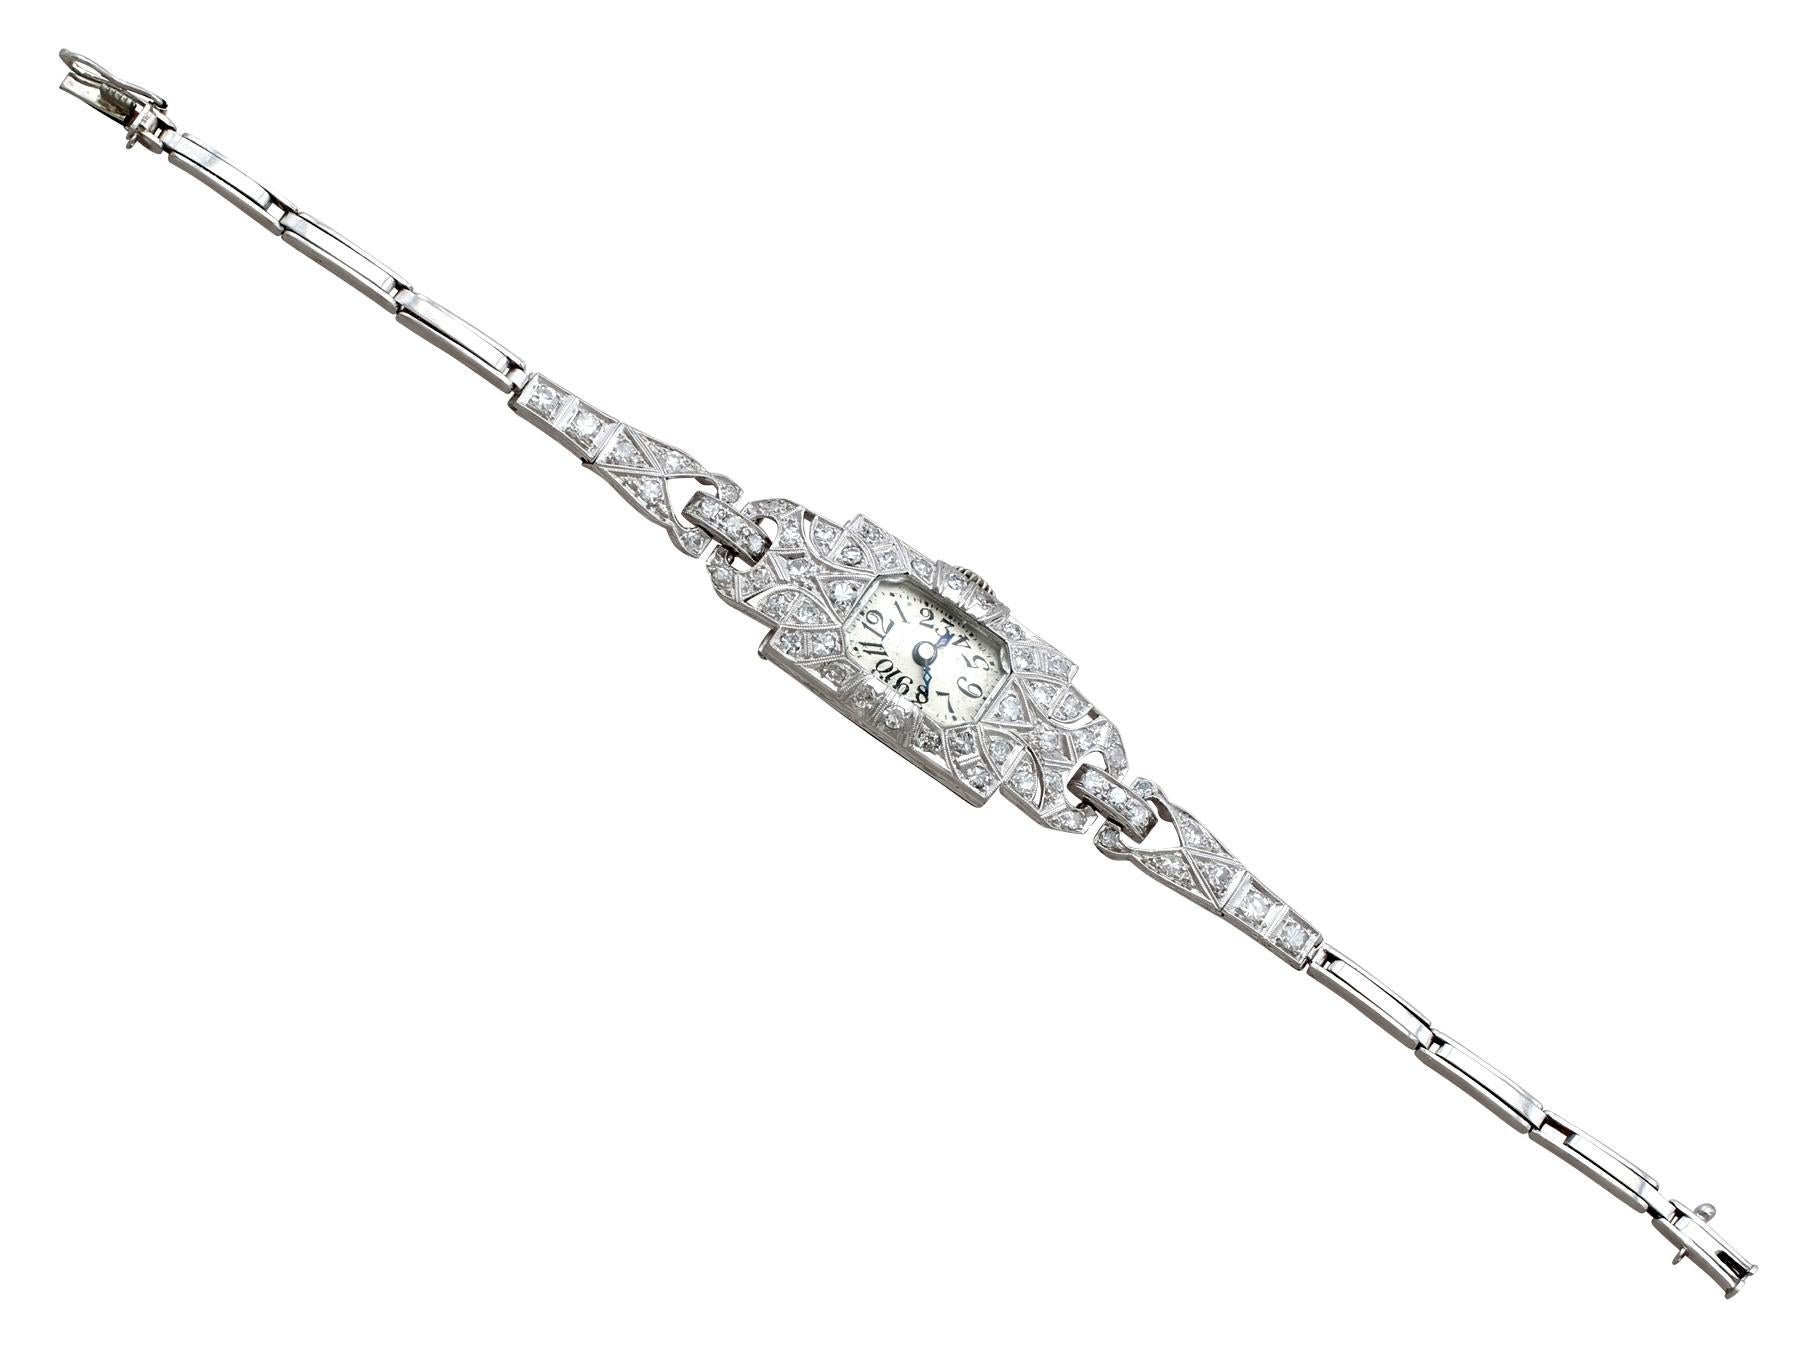 An impressive antique 1920's Art Deco 1.86 Ct diamond and platinum ladies cocktail watch; part of our diverse antique jewelry and estate jewelry collections.

This stunning, fine and impressive 1920's ladies diamond watch has been crafted in